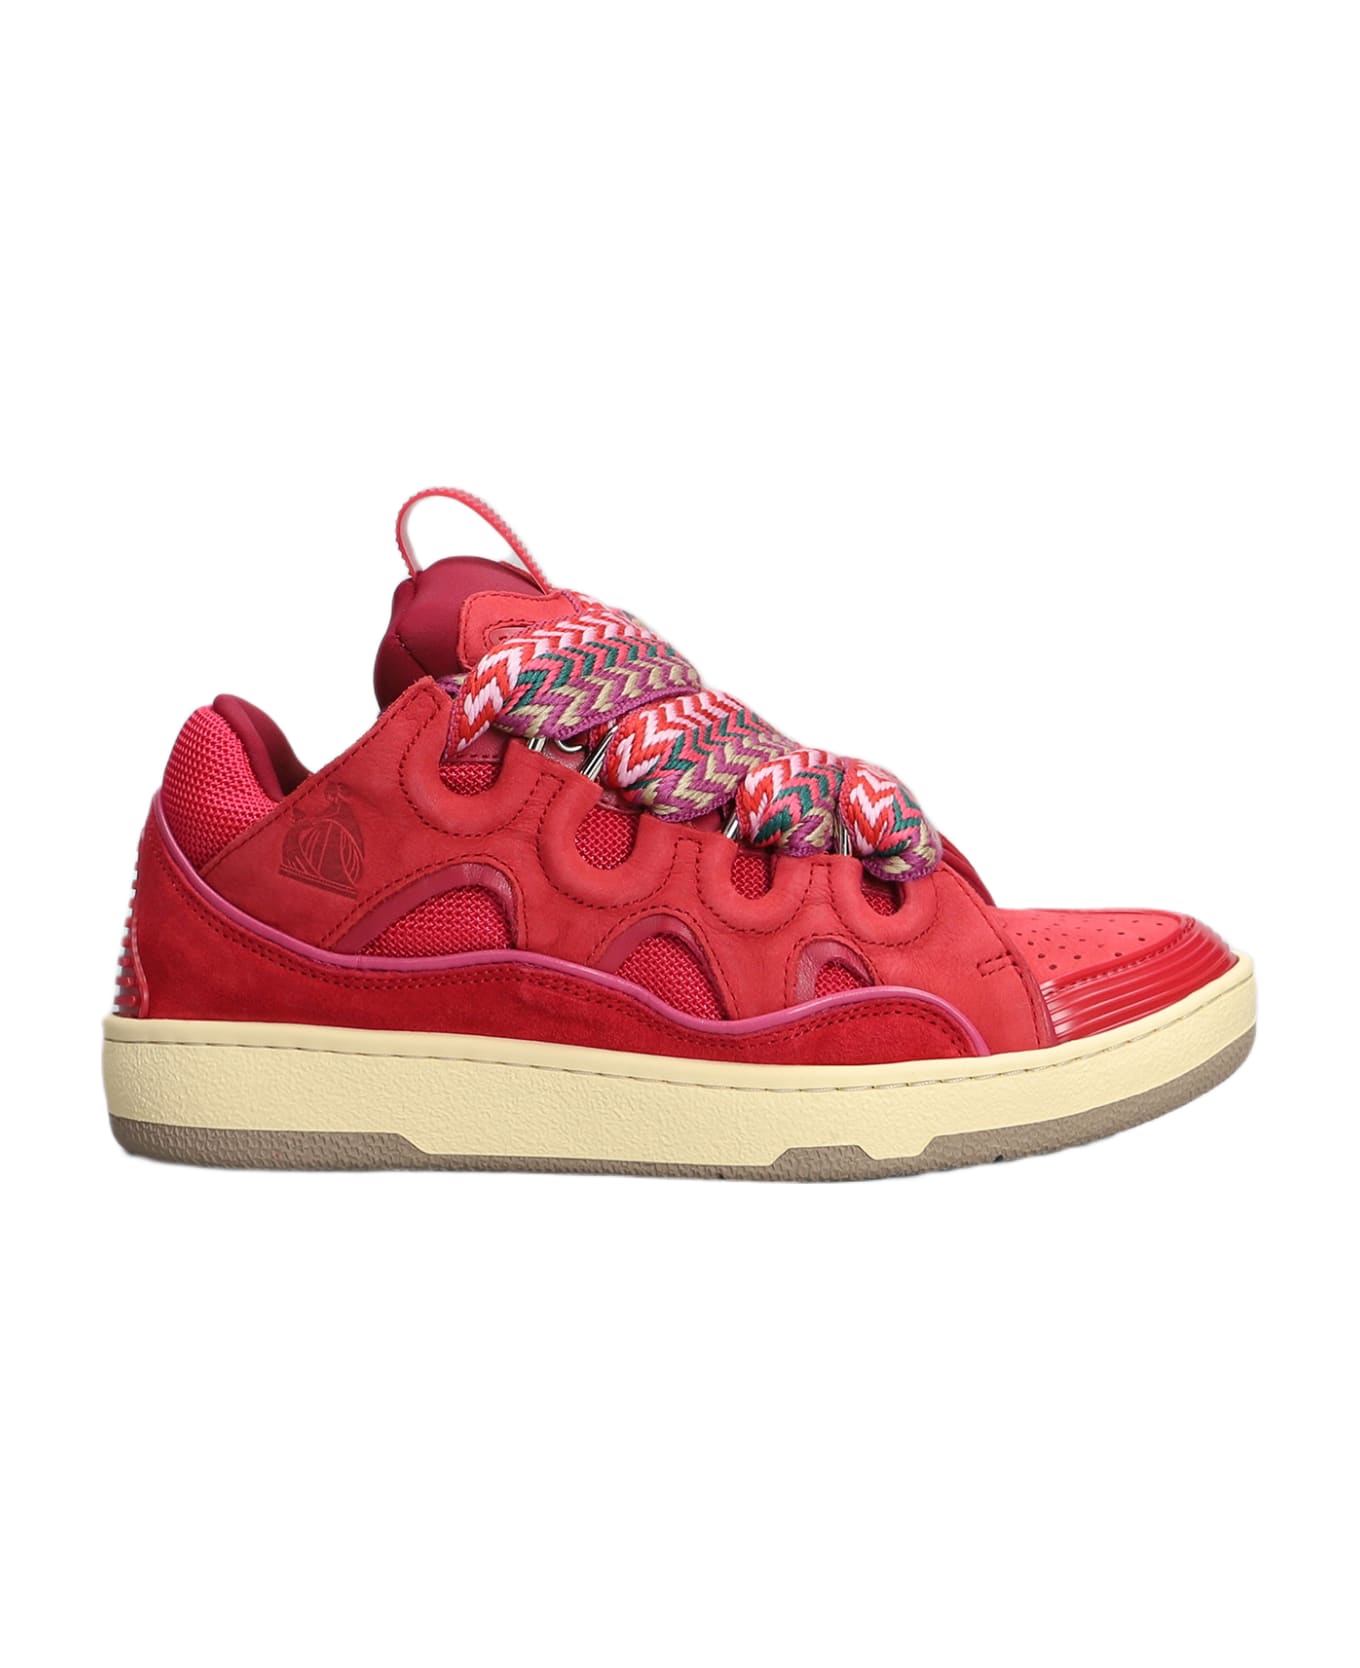 Lanvin Curb Sneakers In Fuxia Suede And Leather - fuxia スニーカー